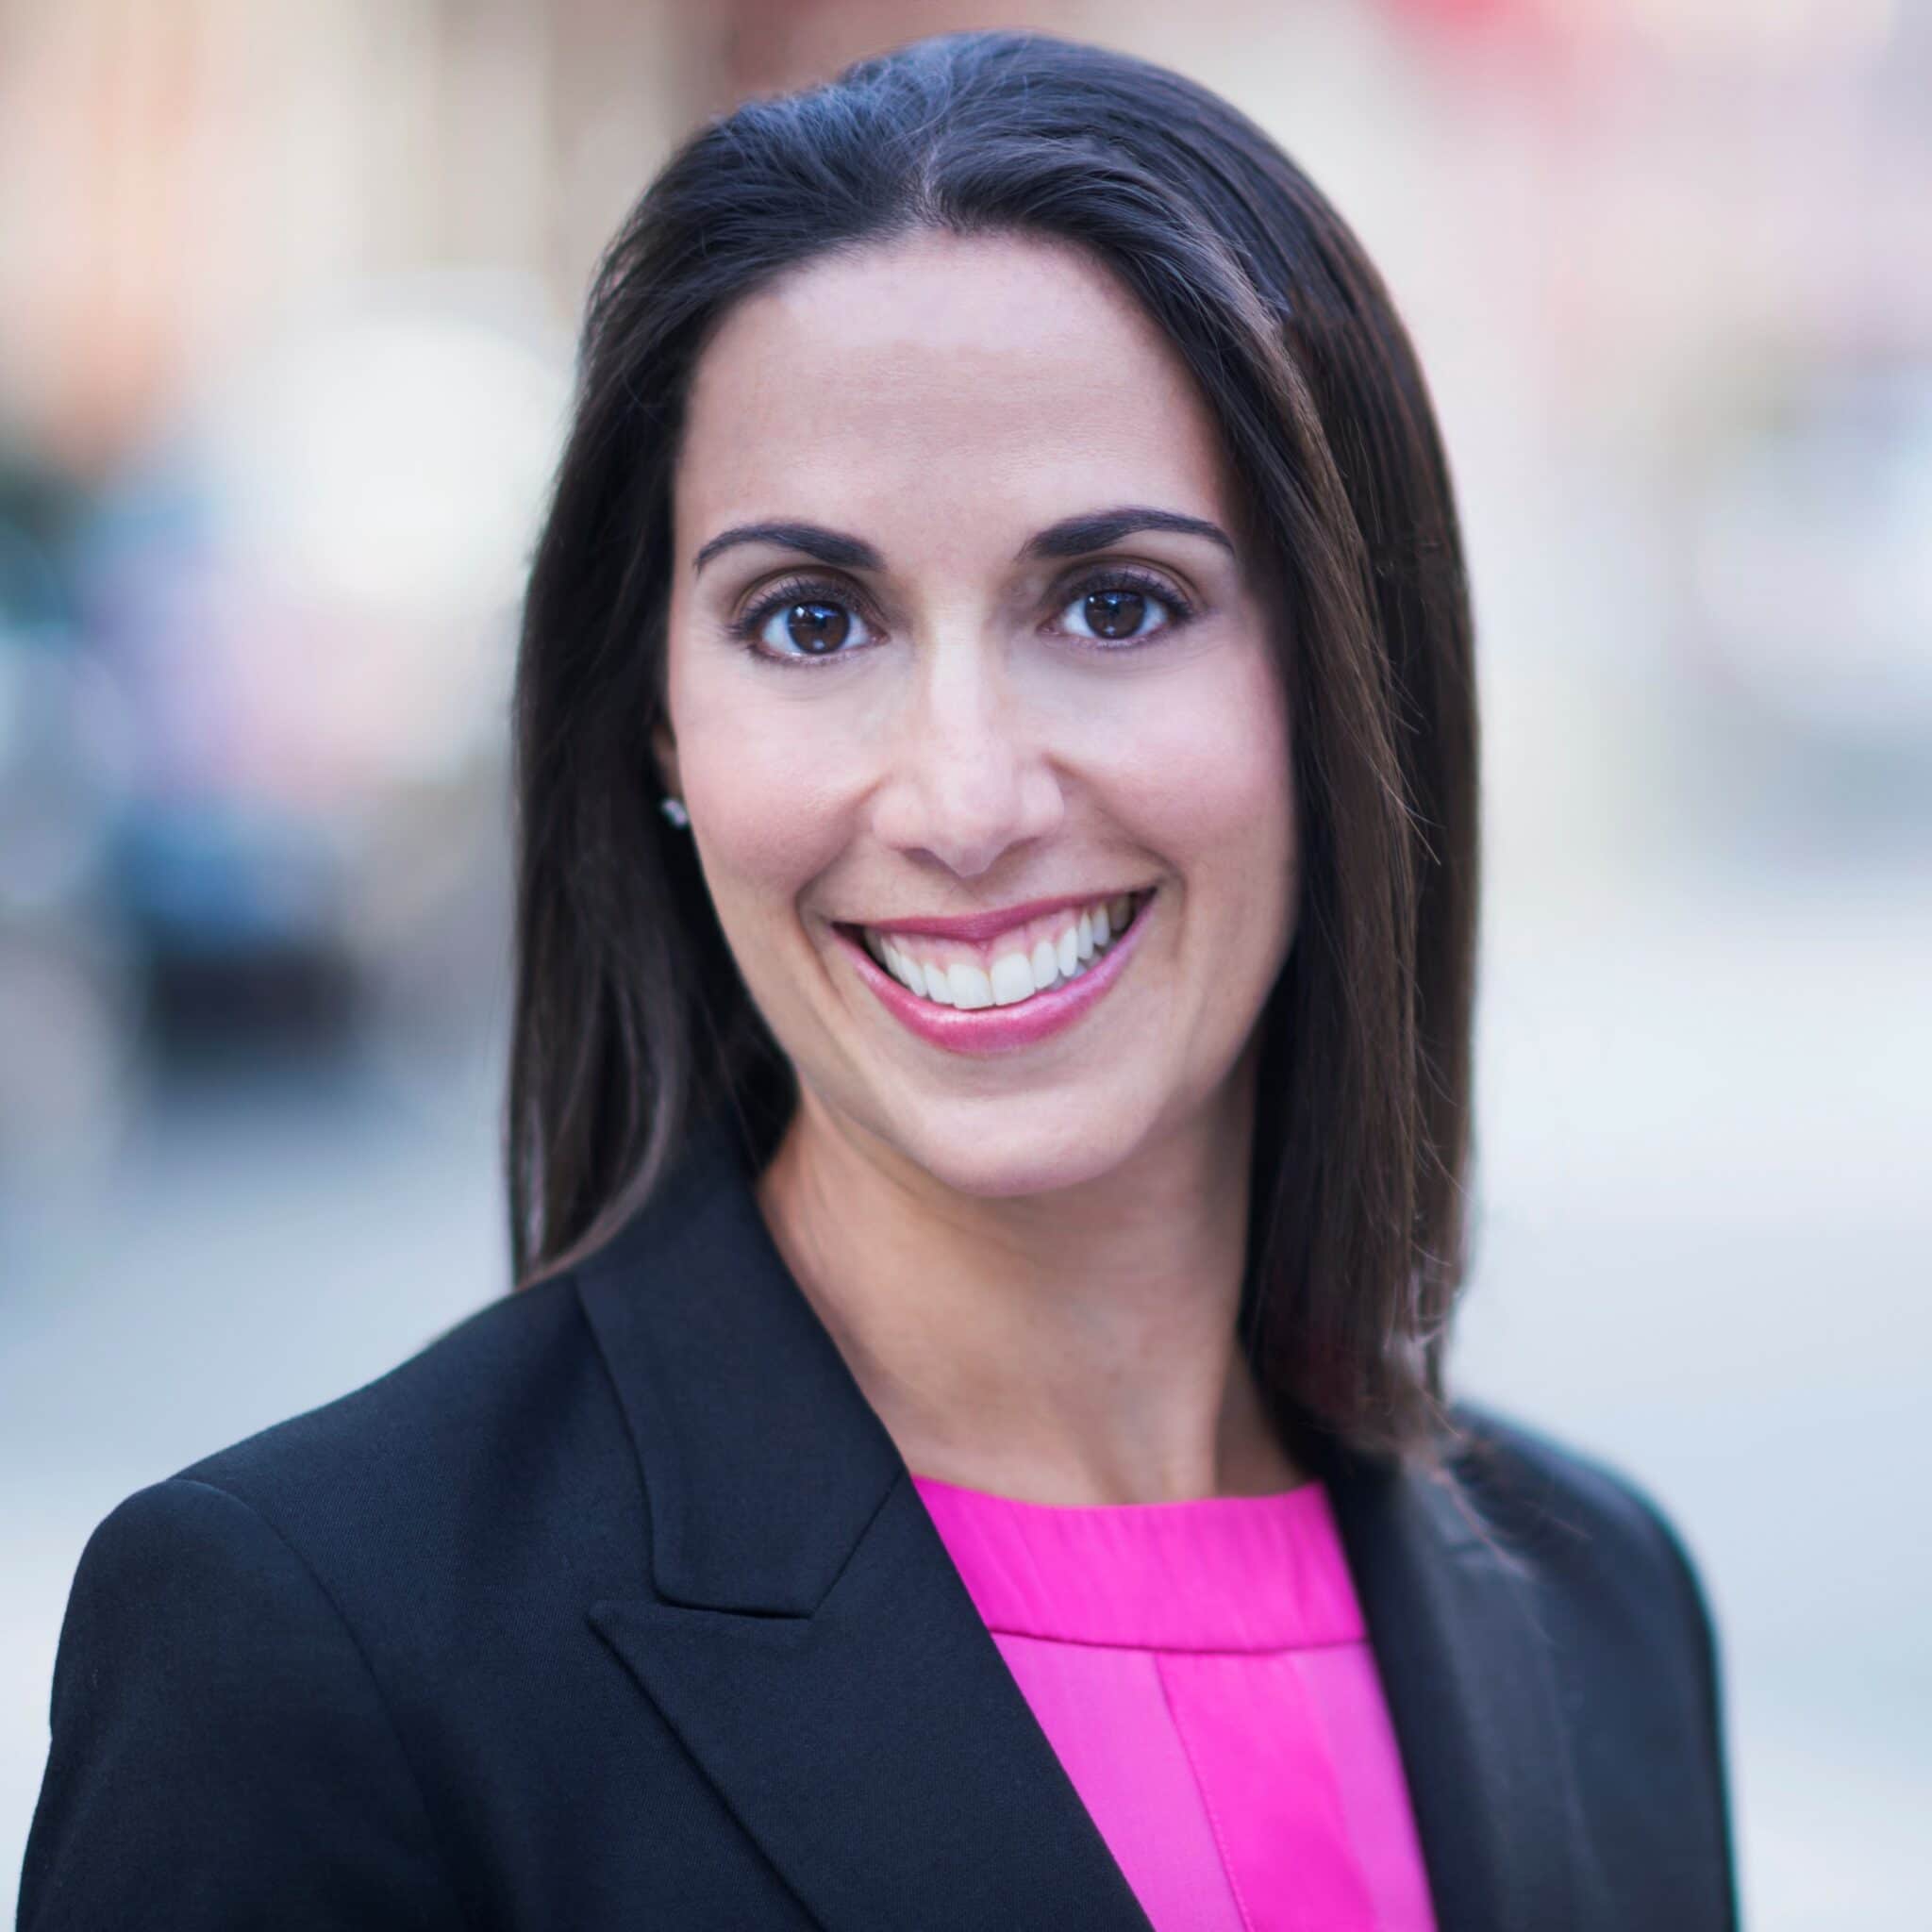 Alyssa Gelbard, Founder & CEO of Point Road Group